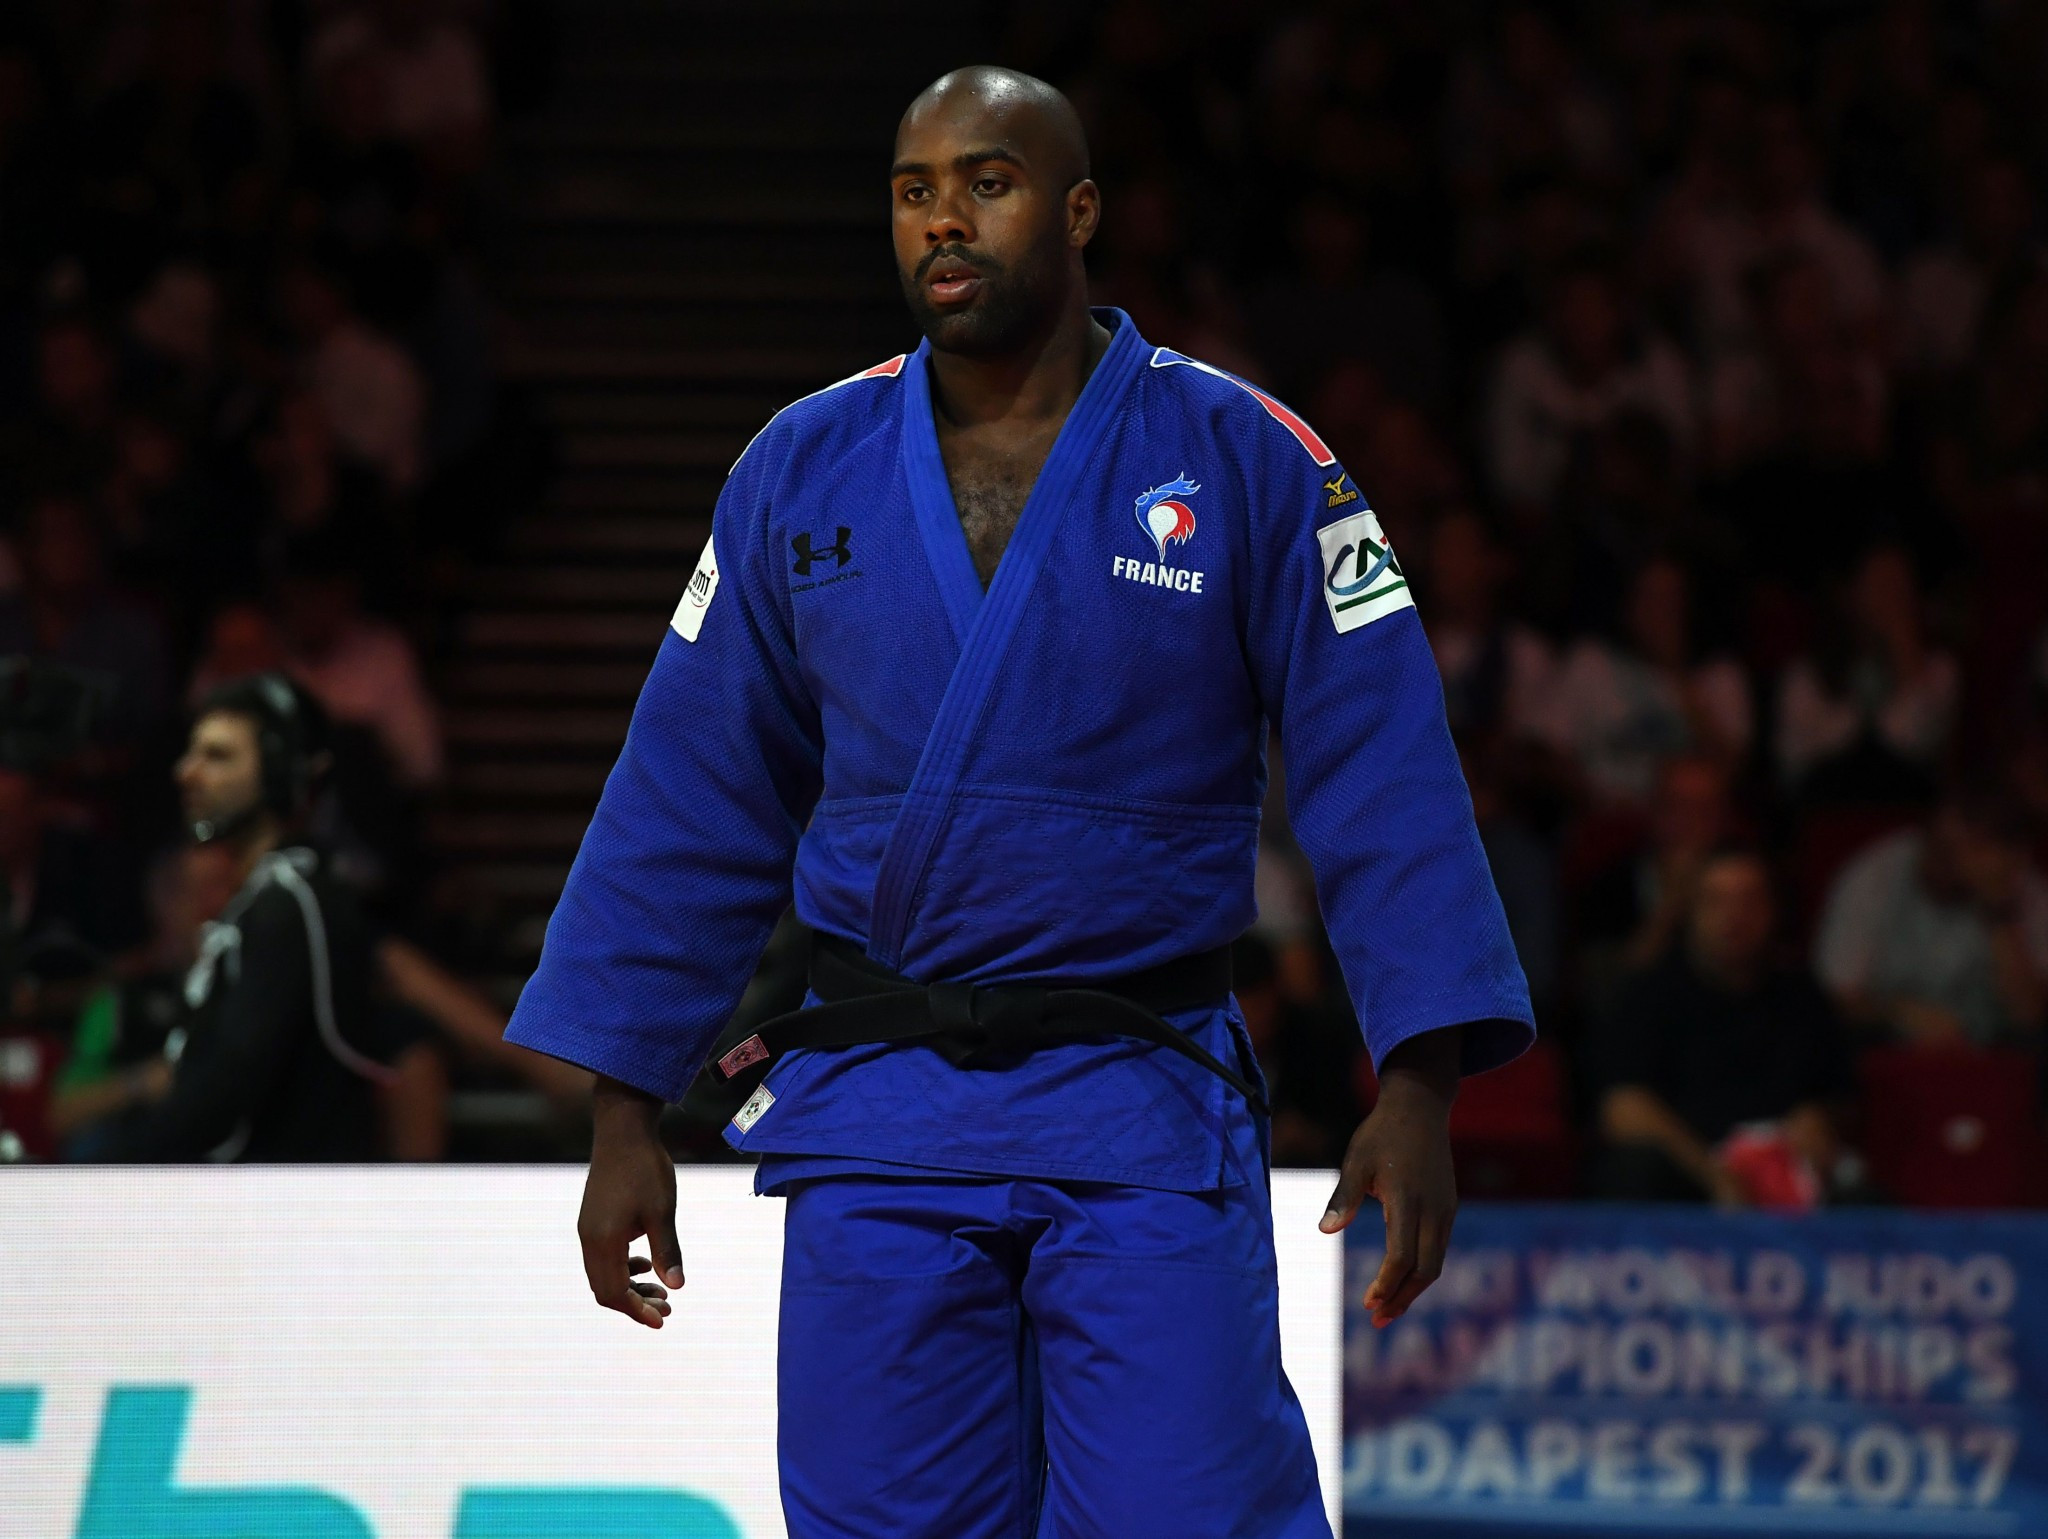 Riner could return as chairman of IJF Athletes' Commission as new members revealed